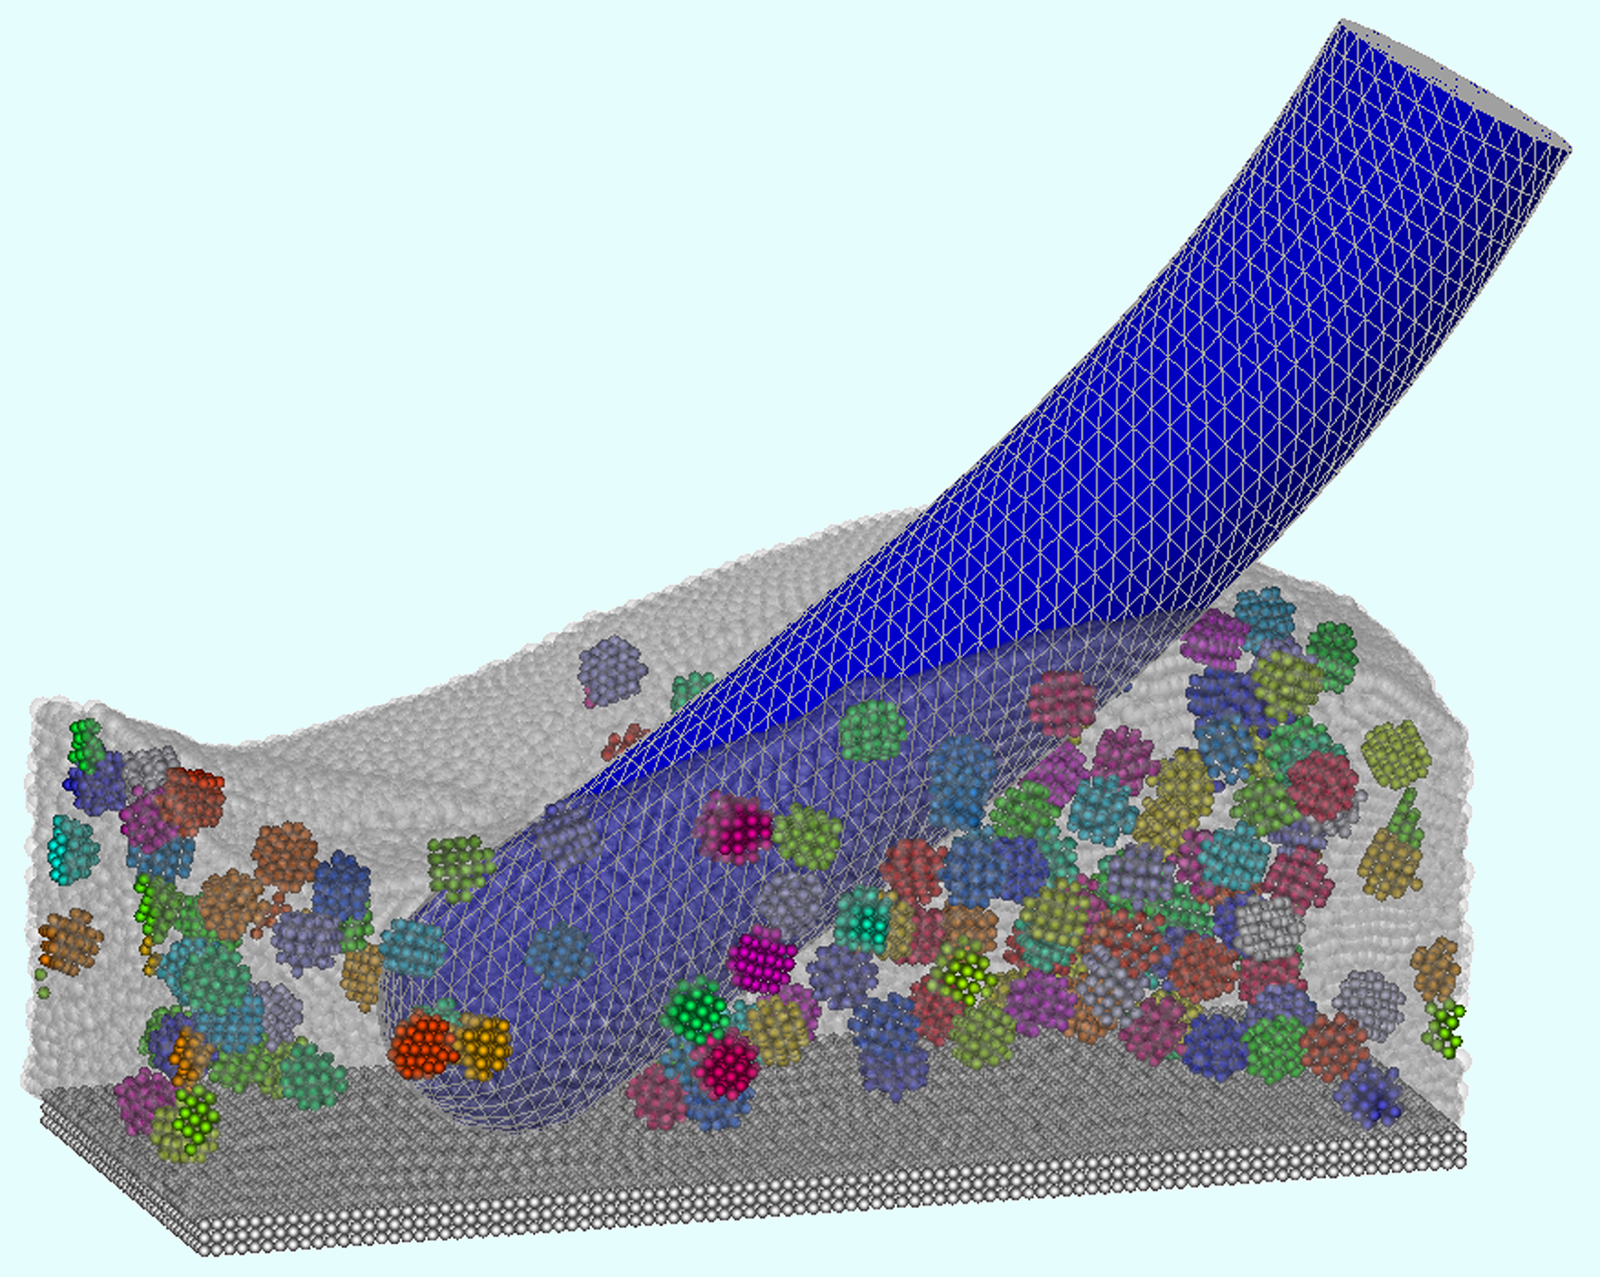 Simulation of interaction between a toothbrush bristle and a suspension with spherical abrasive particles.